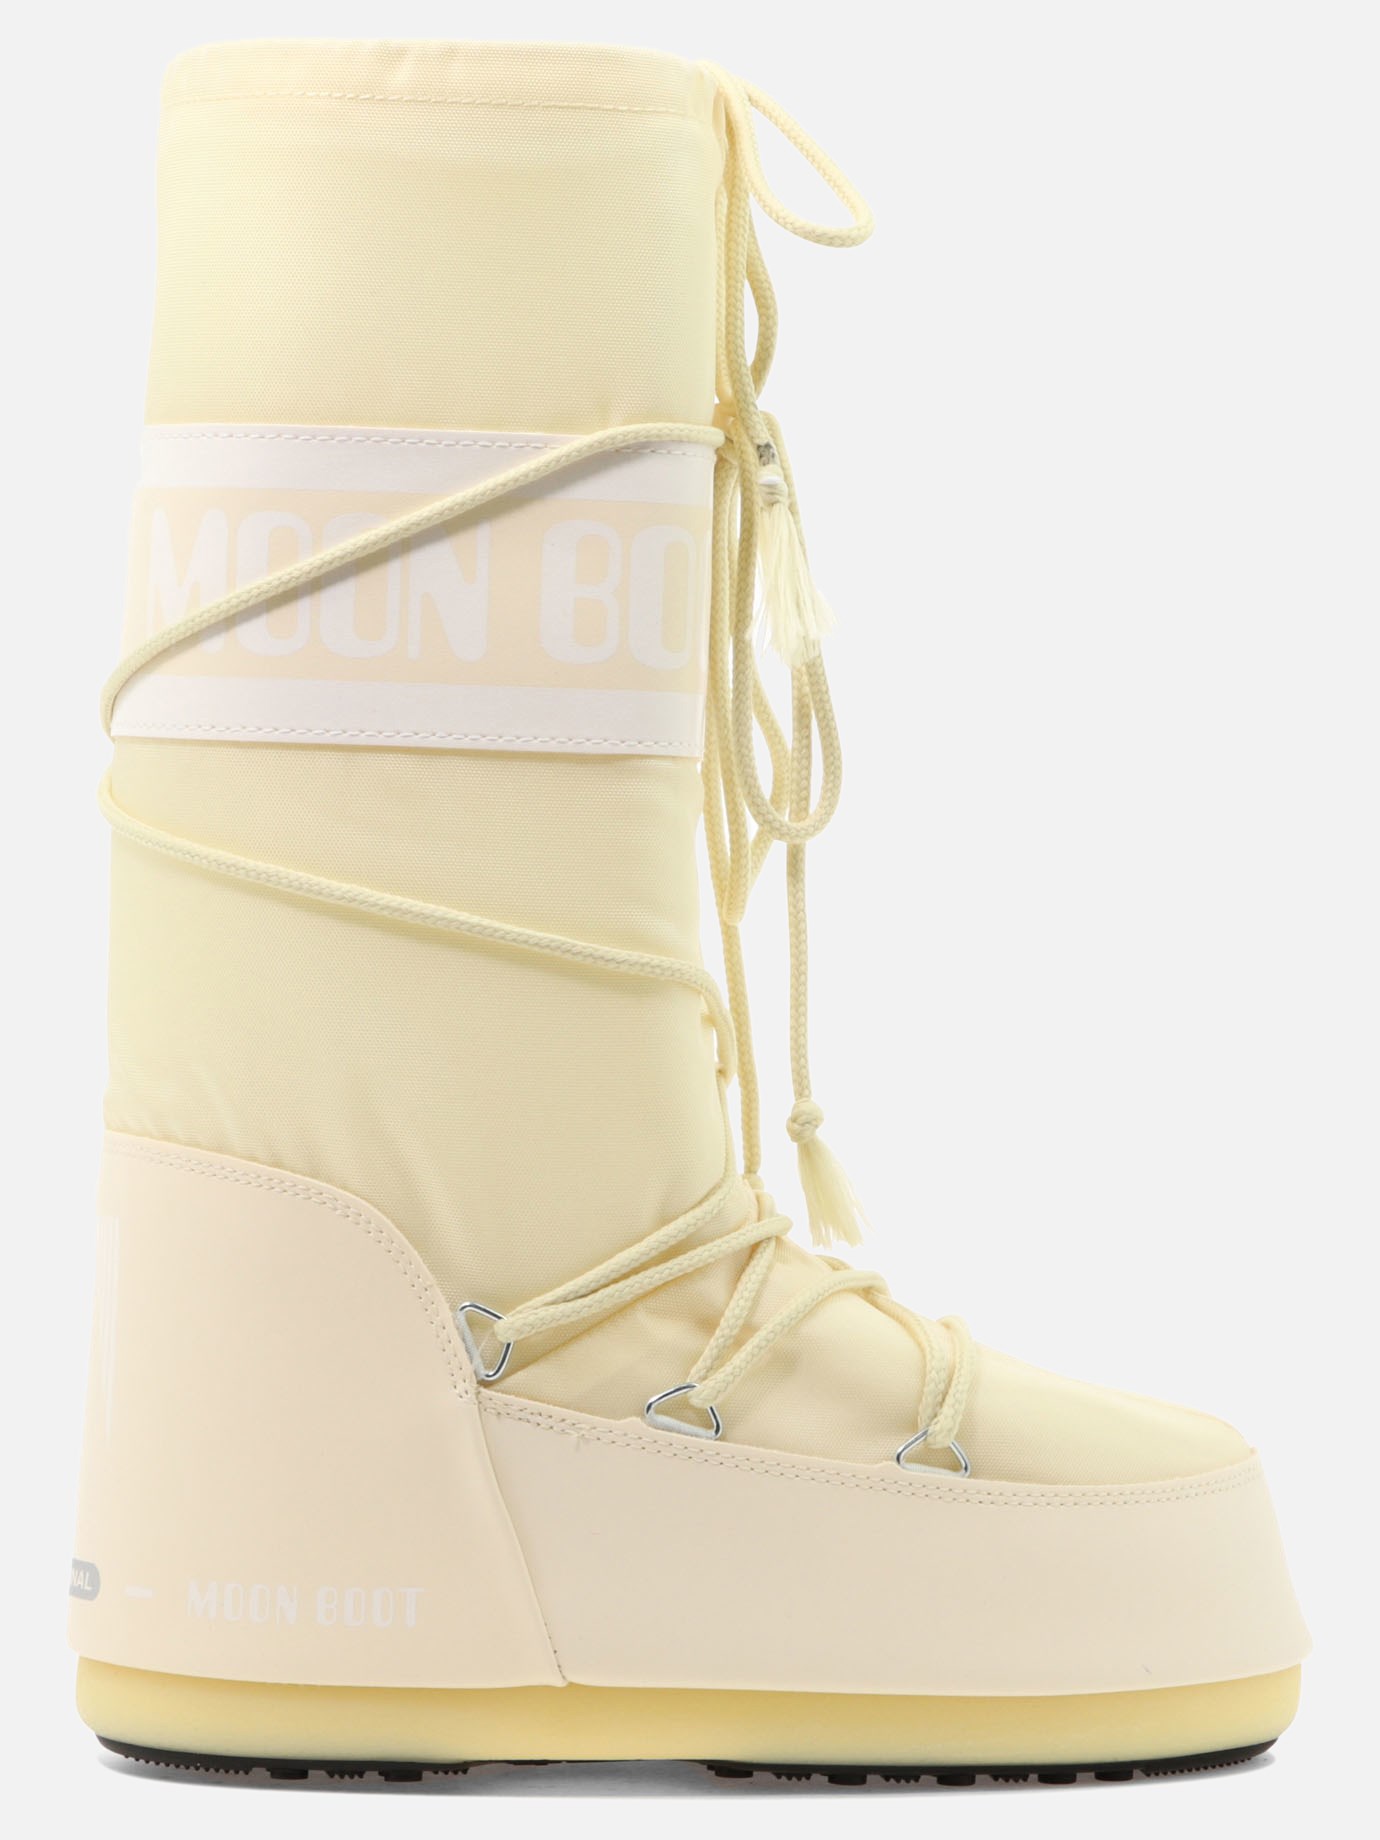  Nylon  after-ski bootsby Moon Boot - 0